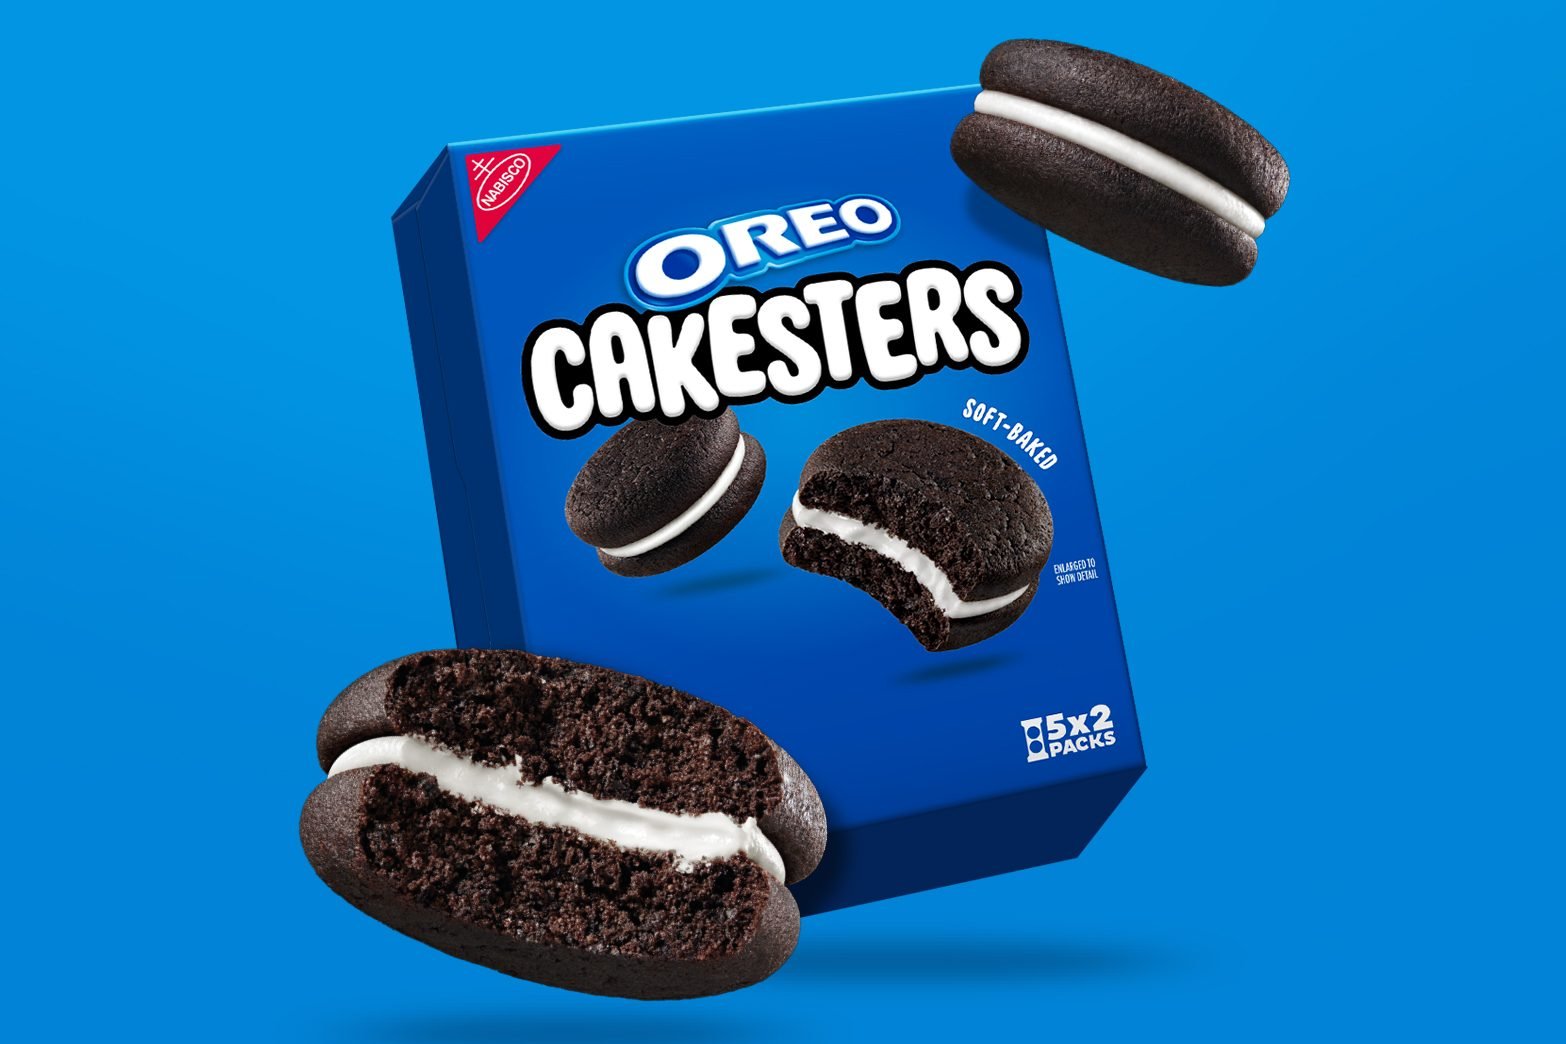 oreo cakesters coming back - Nabisco Oreo Cakesters SoftBaked Enlasged 10 Shon Detail Packs